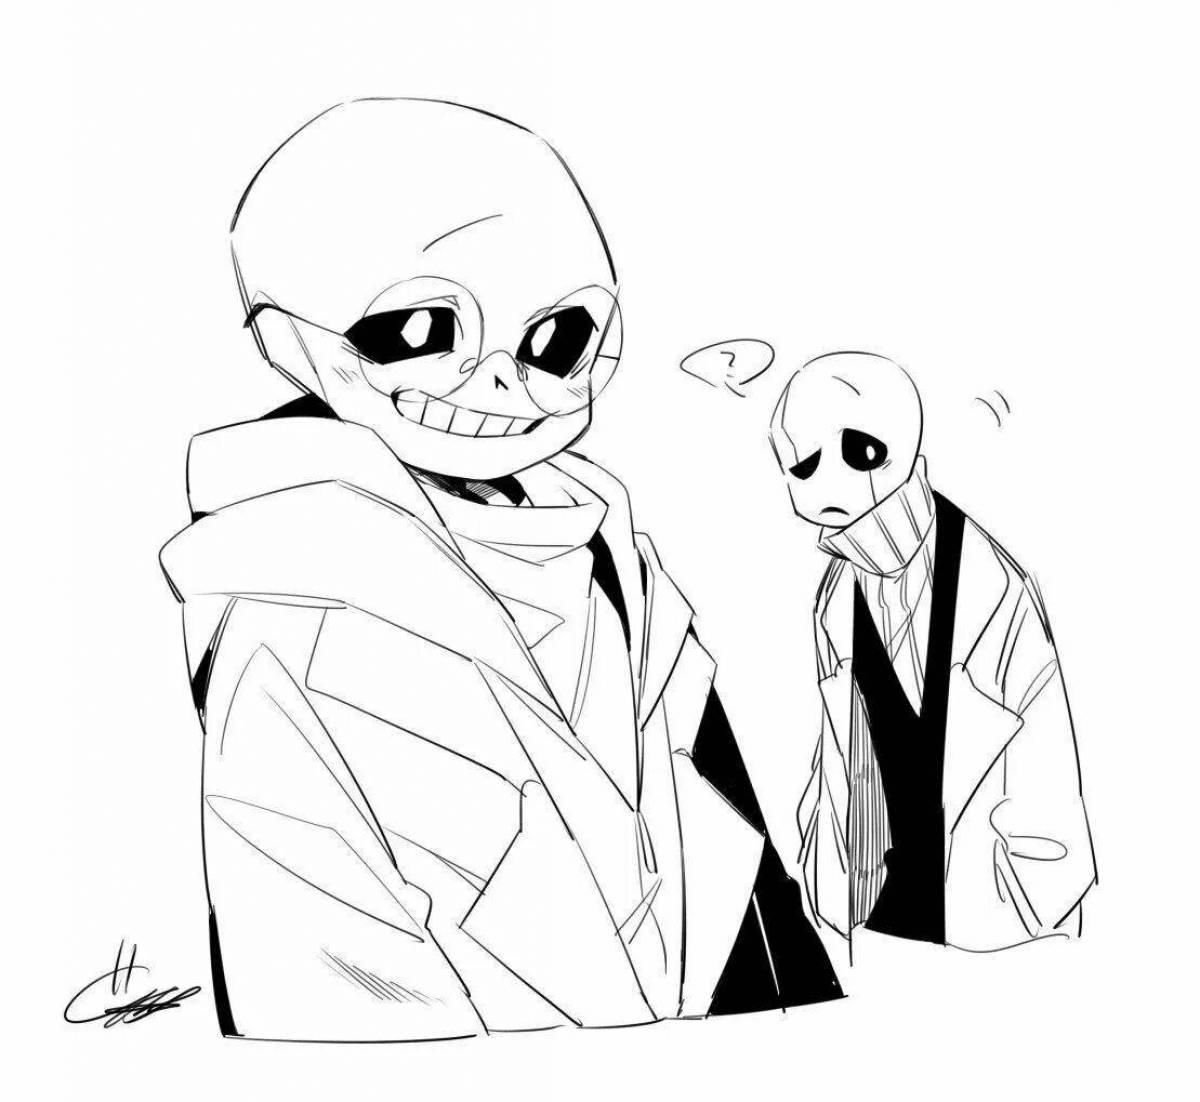 Gaster coloring page